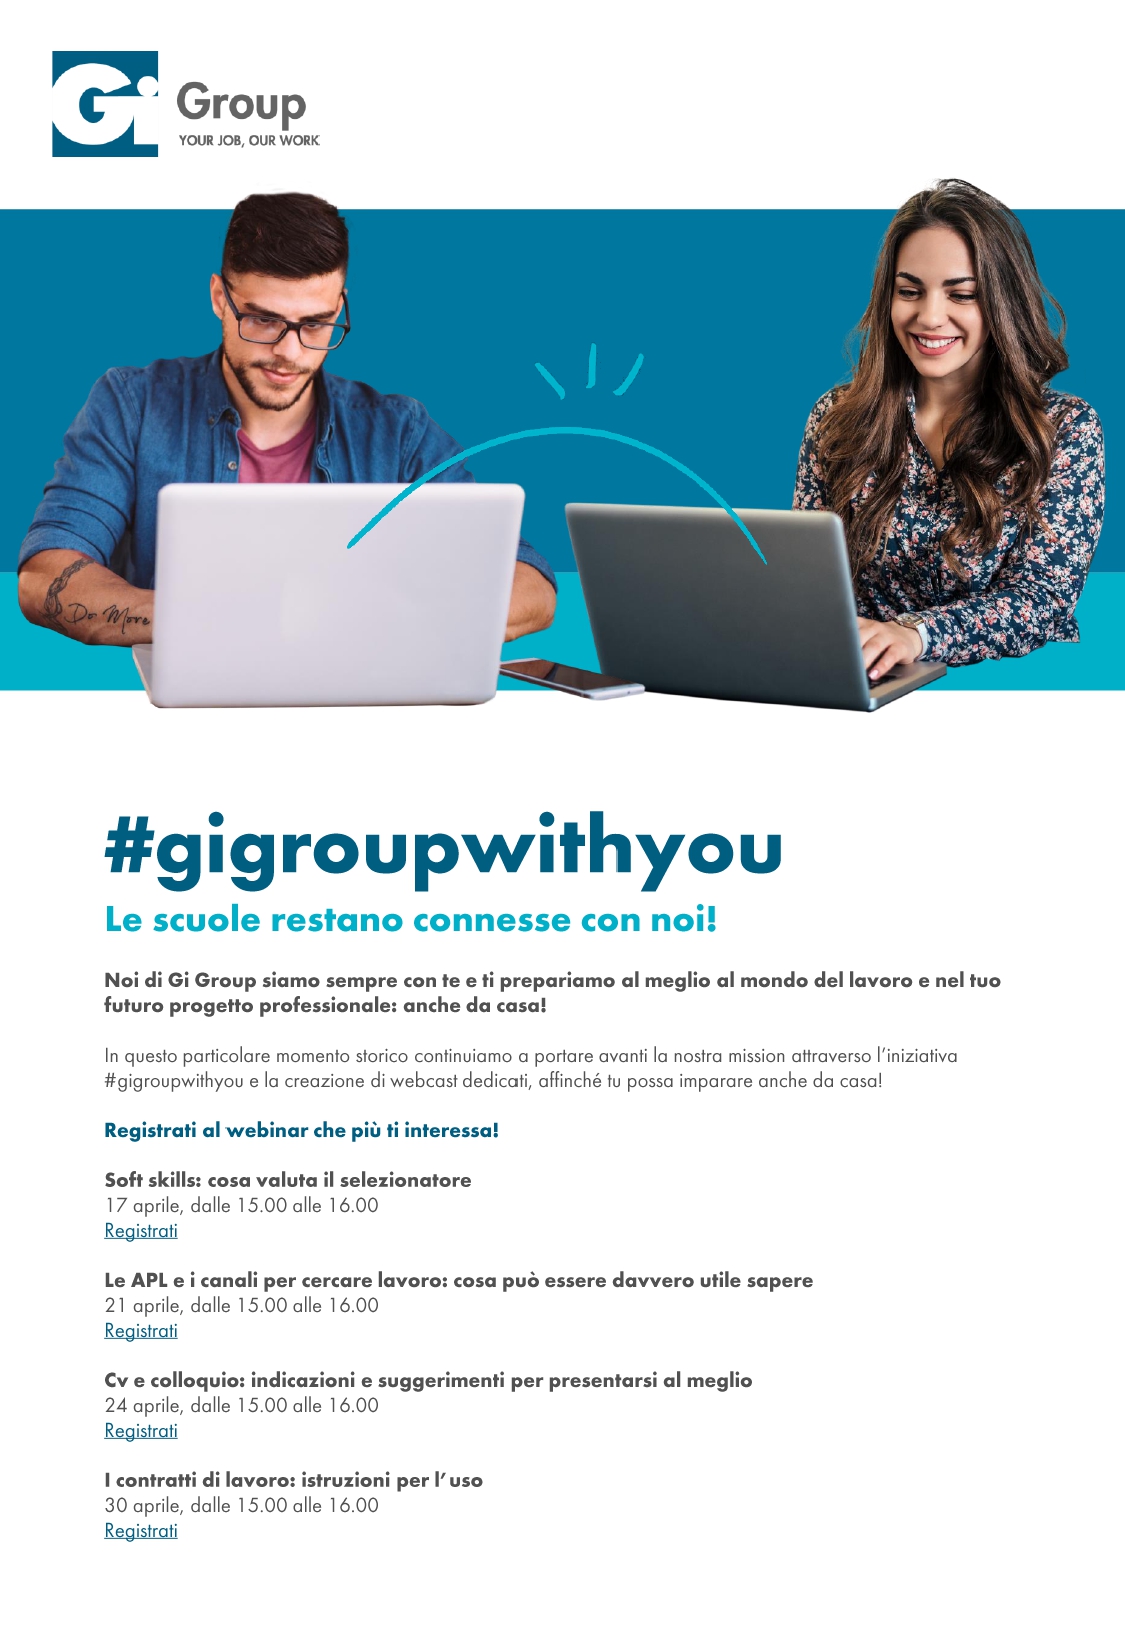 gigroupwithyou scuole page 0001